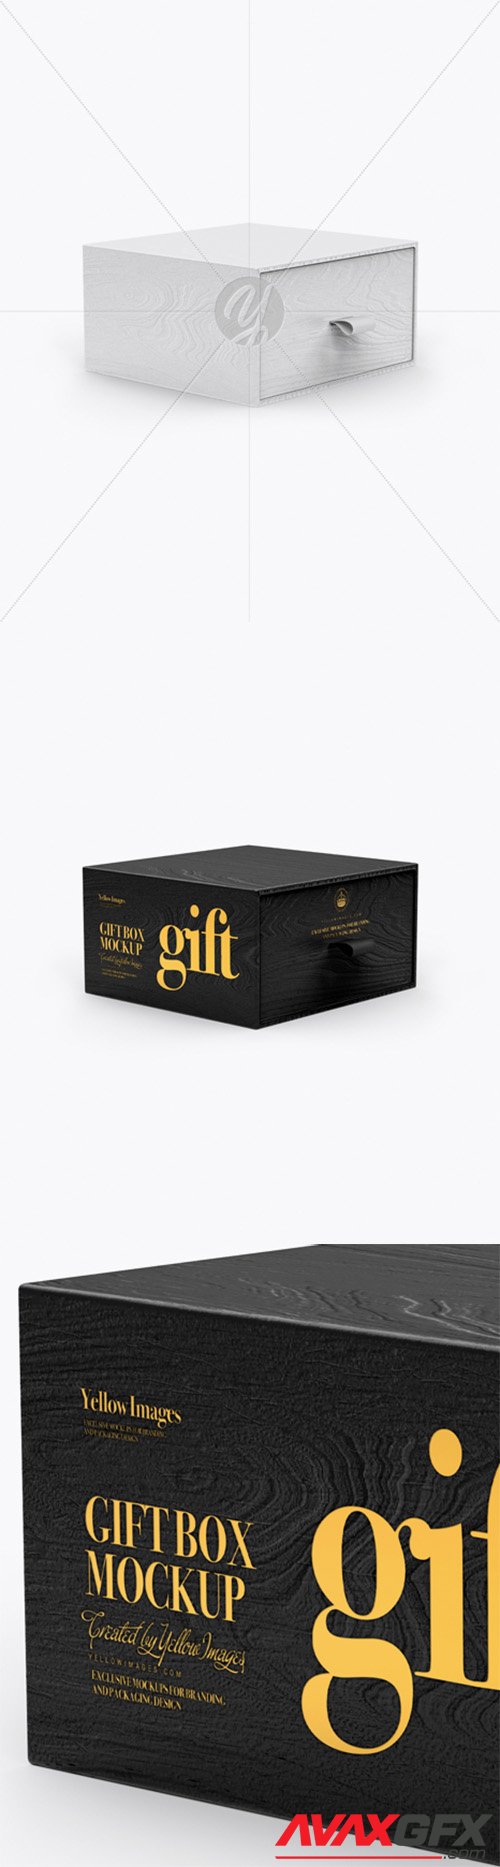 Download Wooden Gift Box Mockup Half Side View 21796 Avaxgfx All Downloads That You Need In One Place Graphic From Nitroflare Rapidgator Yellowimages Mockups